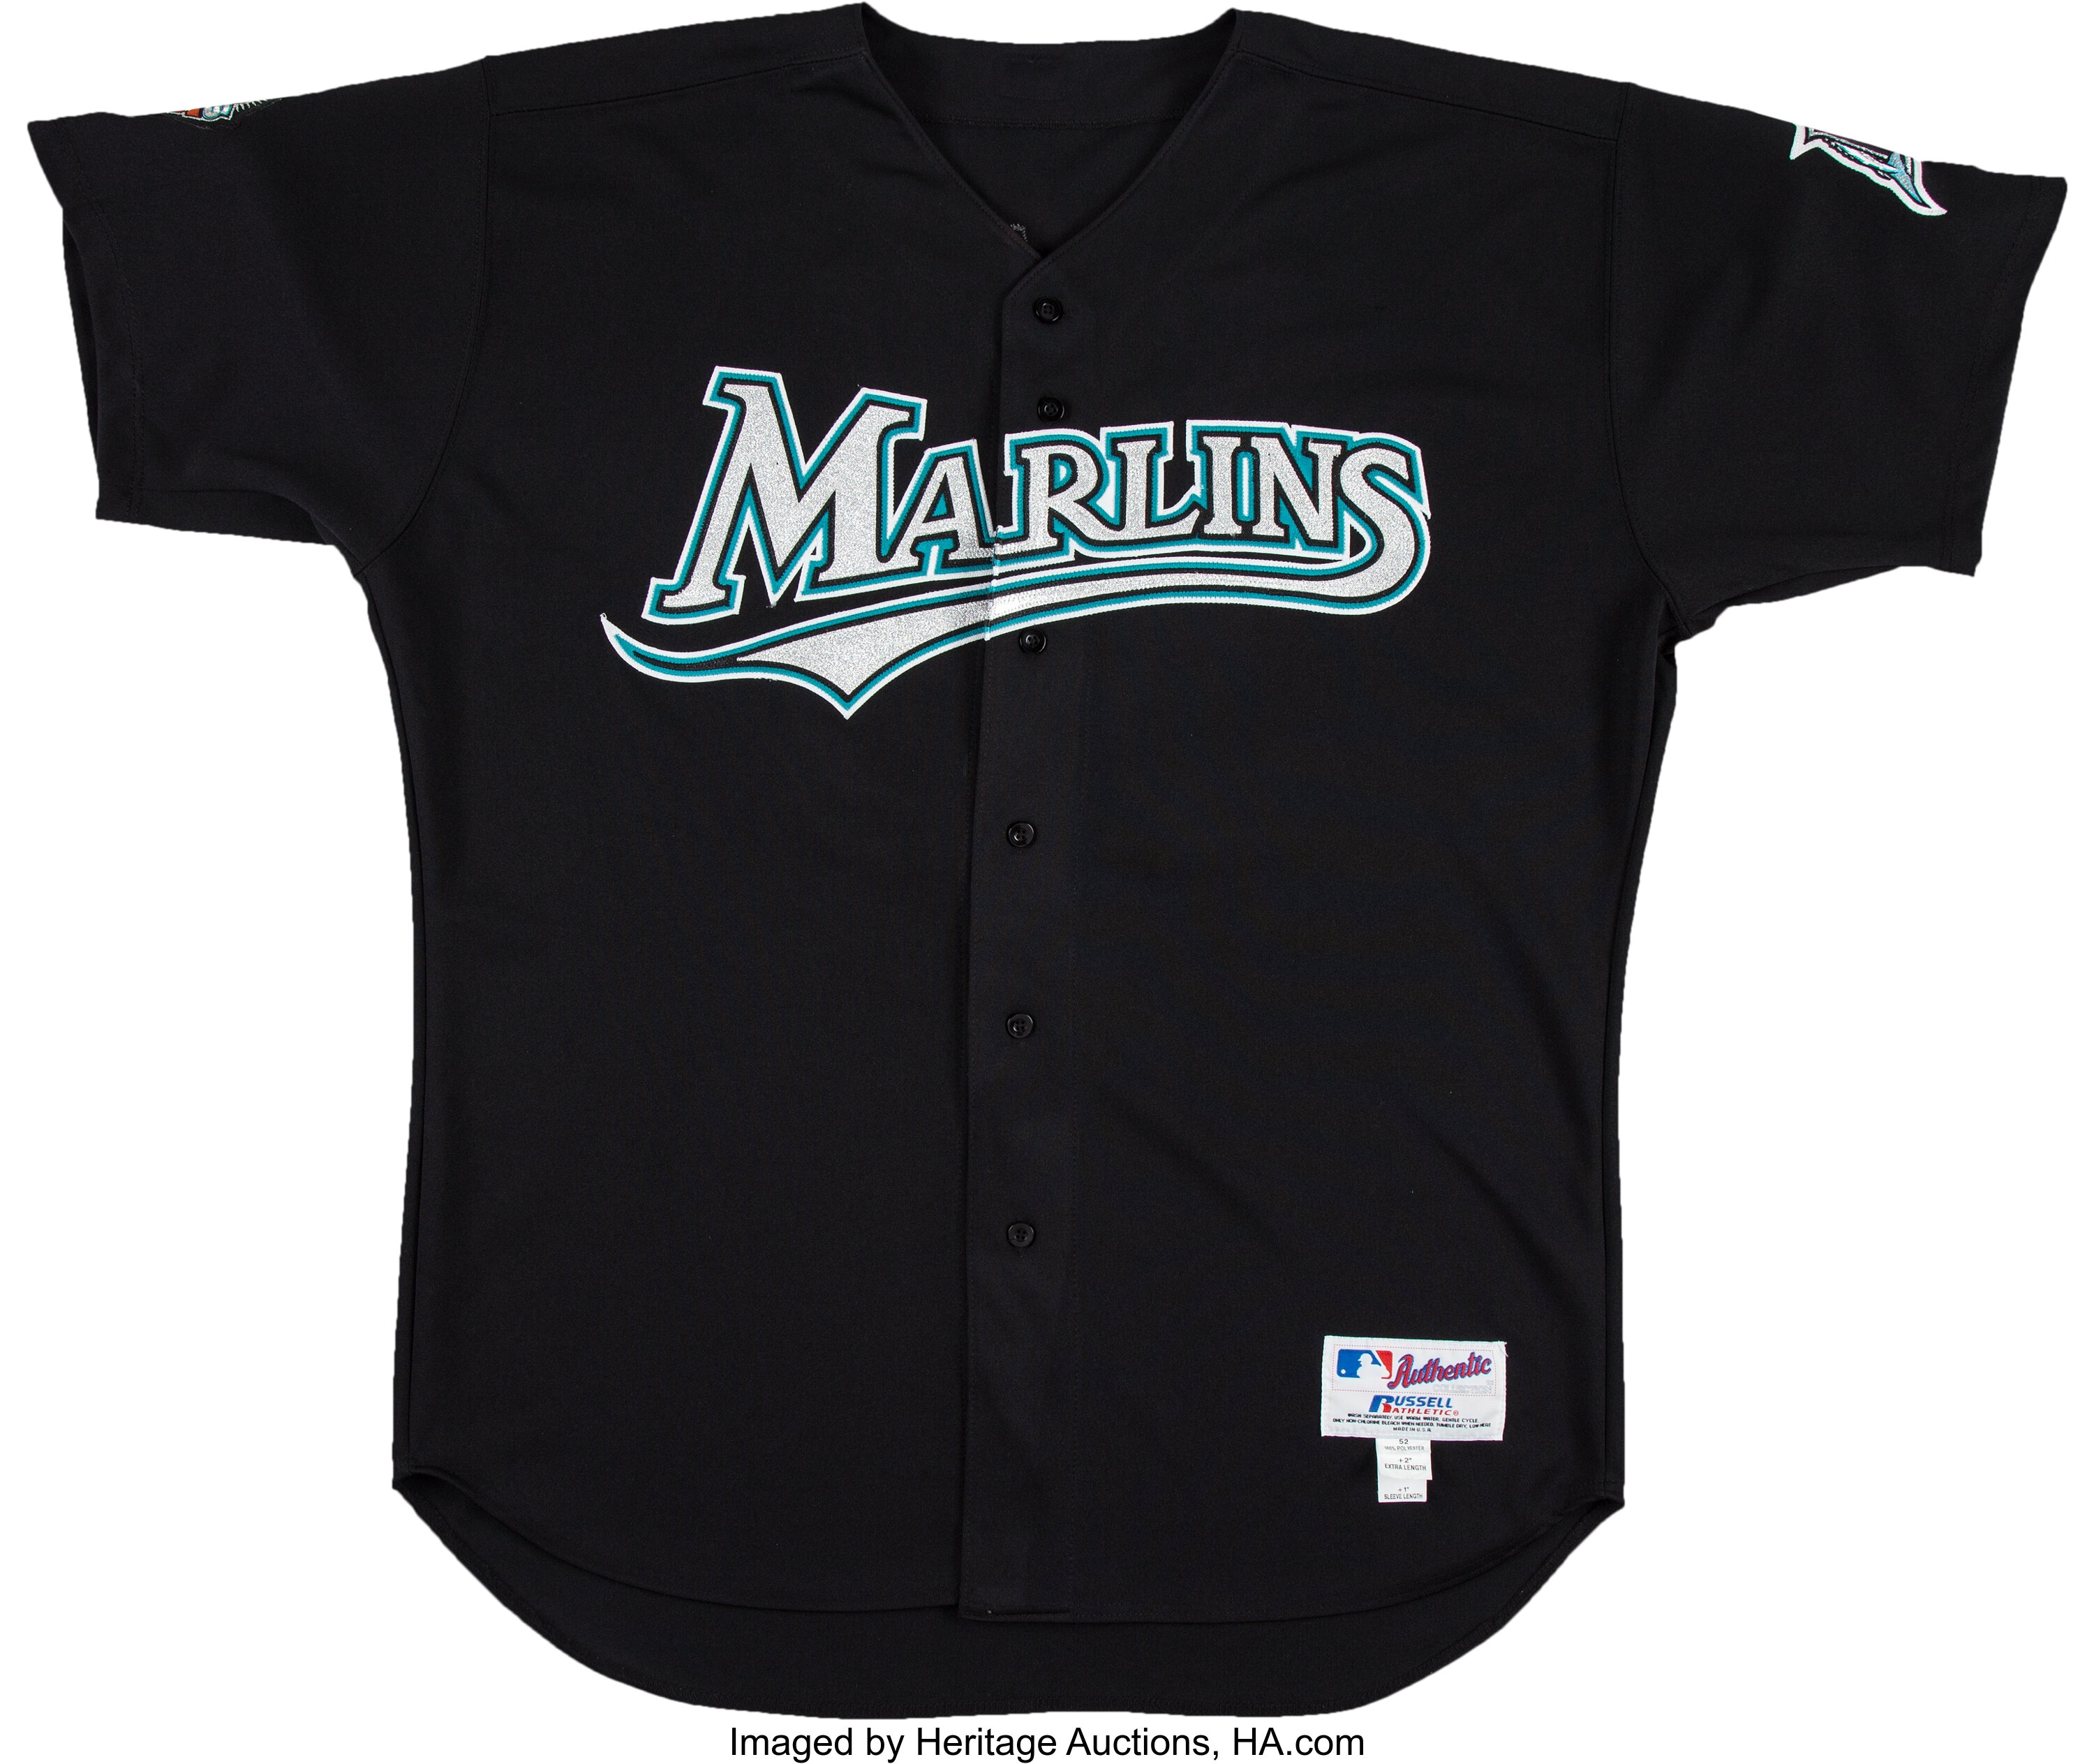 2004 Dontrelle Willis Game Worn Florida Marlins Jersey Gifted to